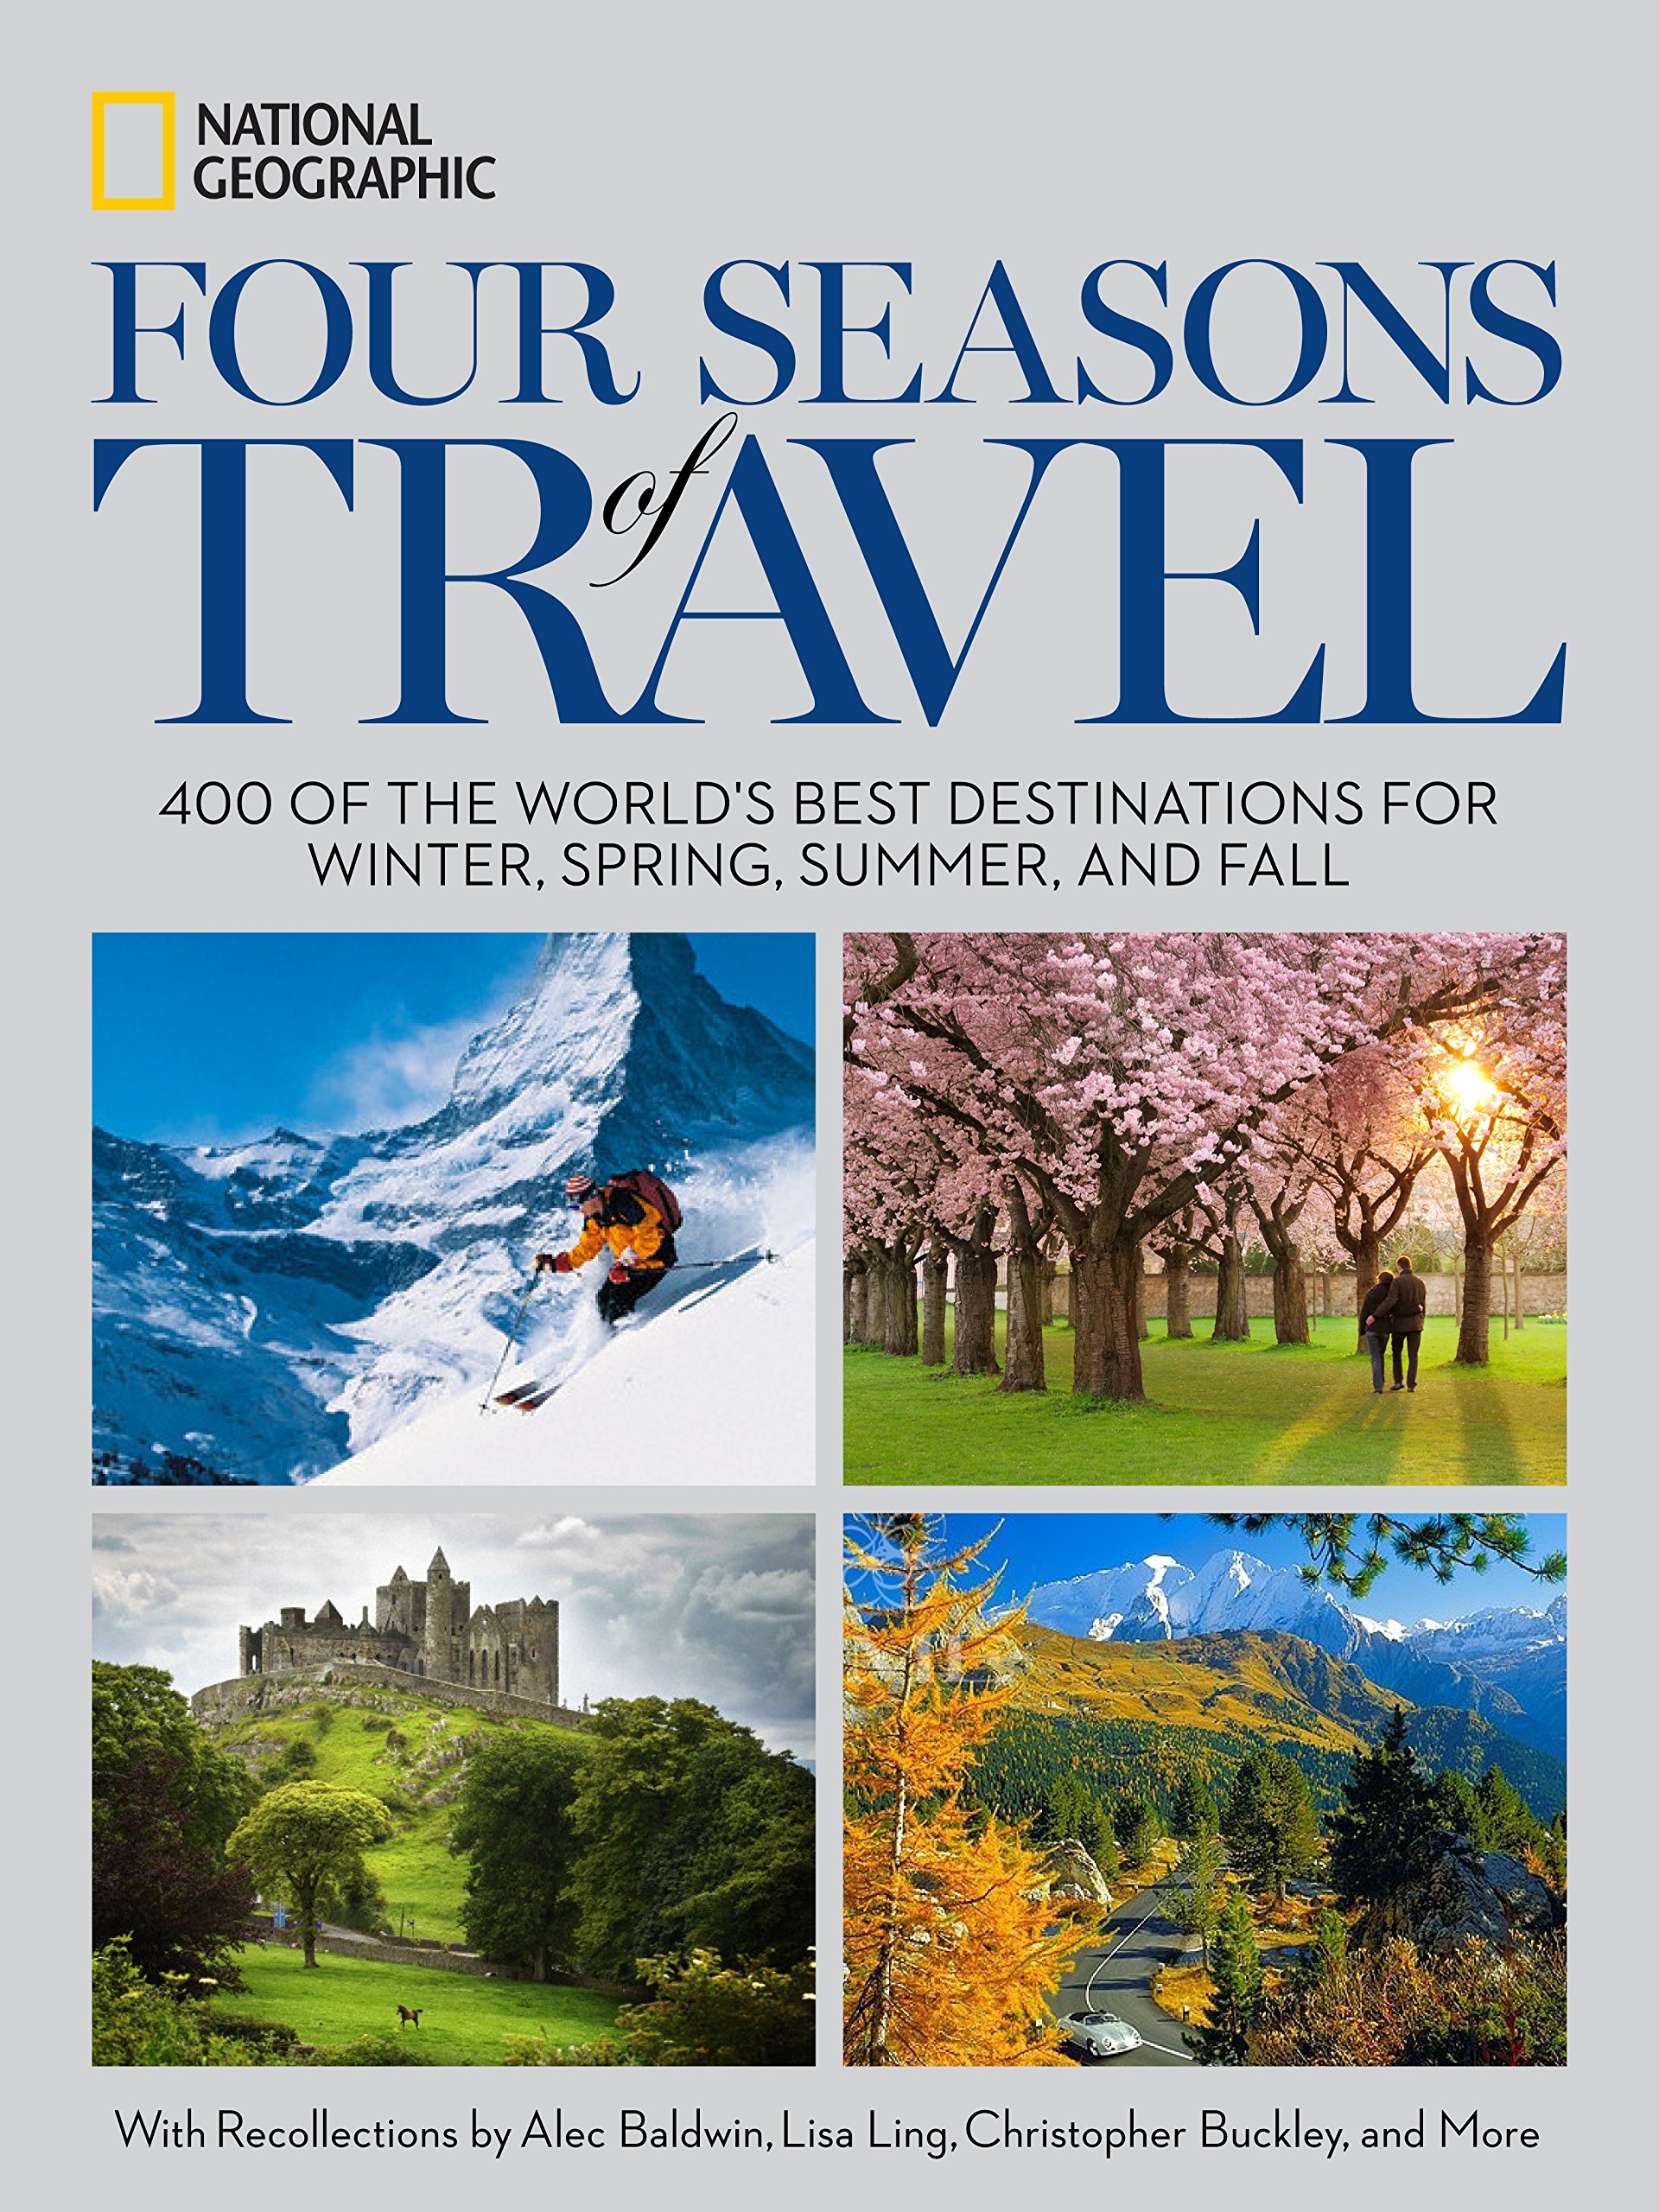 National Geographic: Four Seasons of Travel